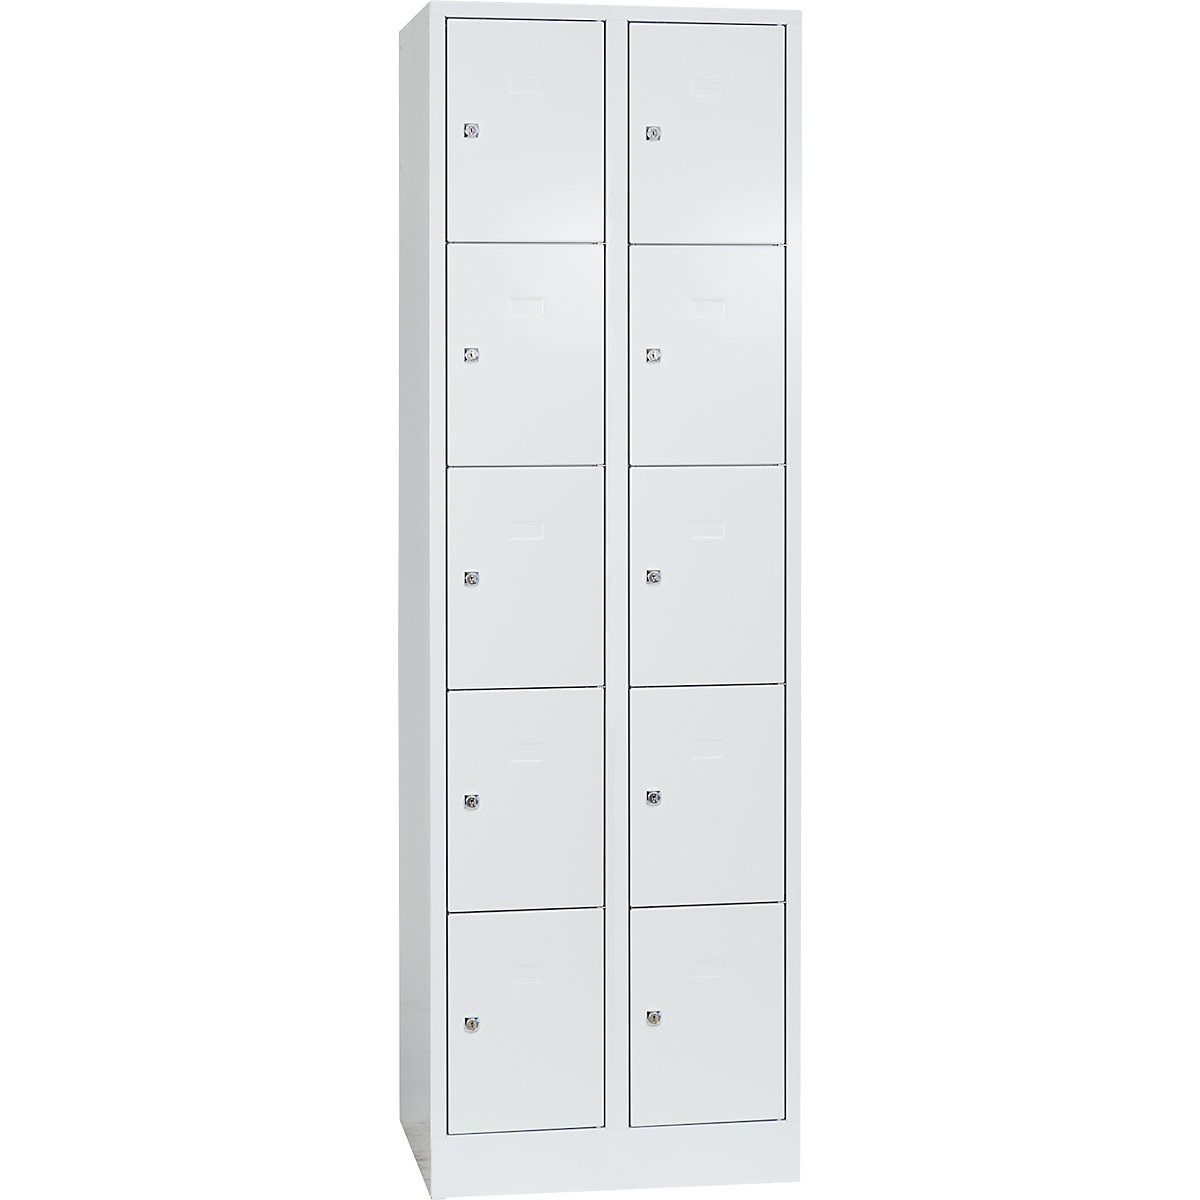 Cloakroom locker system – Wolf, 10 compartments, compartment width 300 mm, light grey / light grey-8